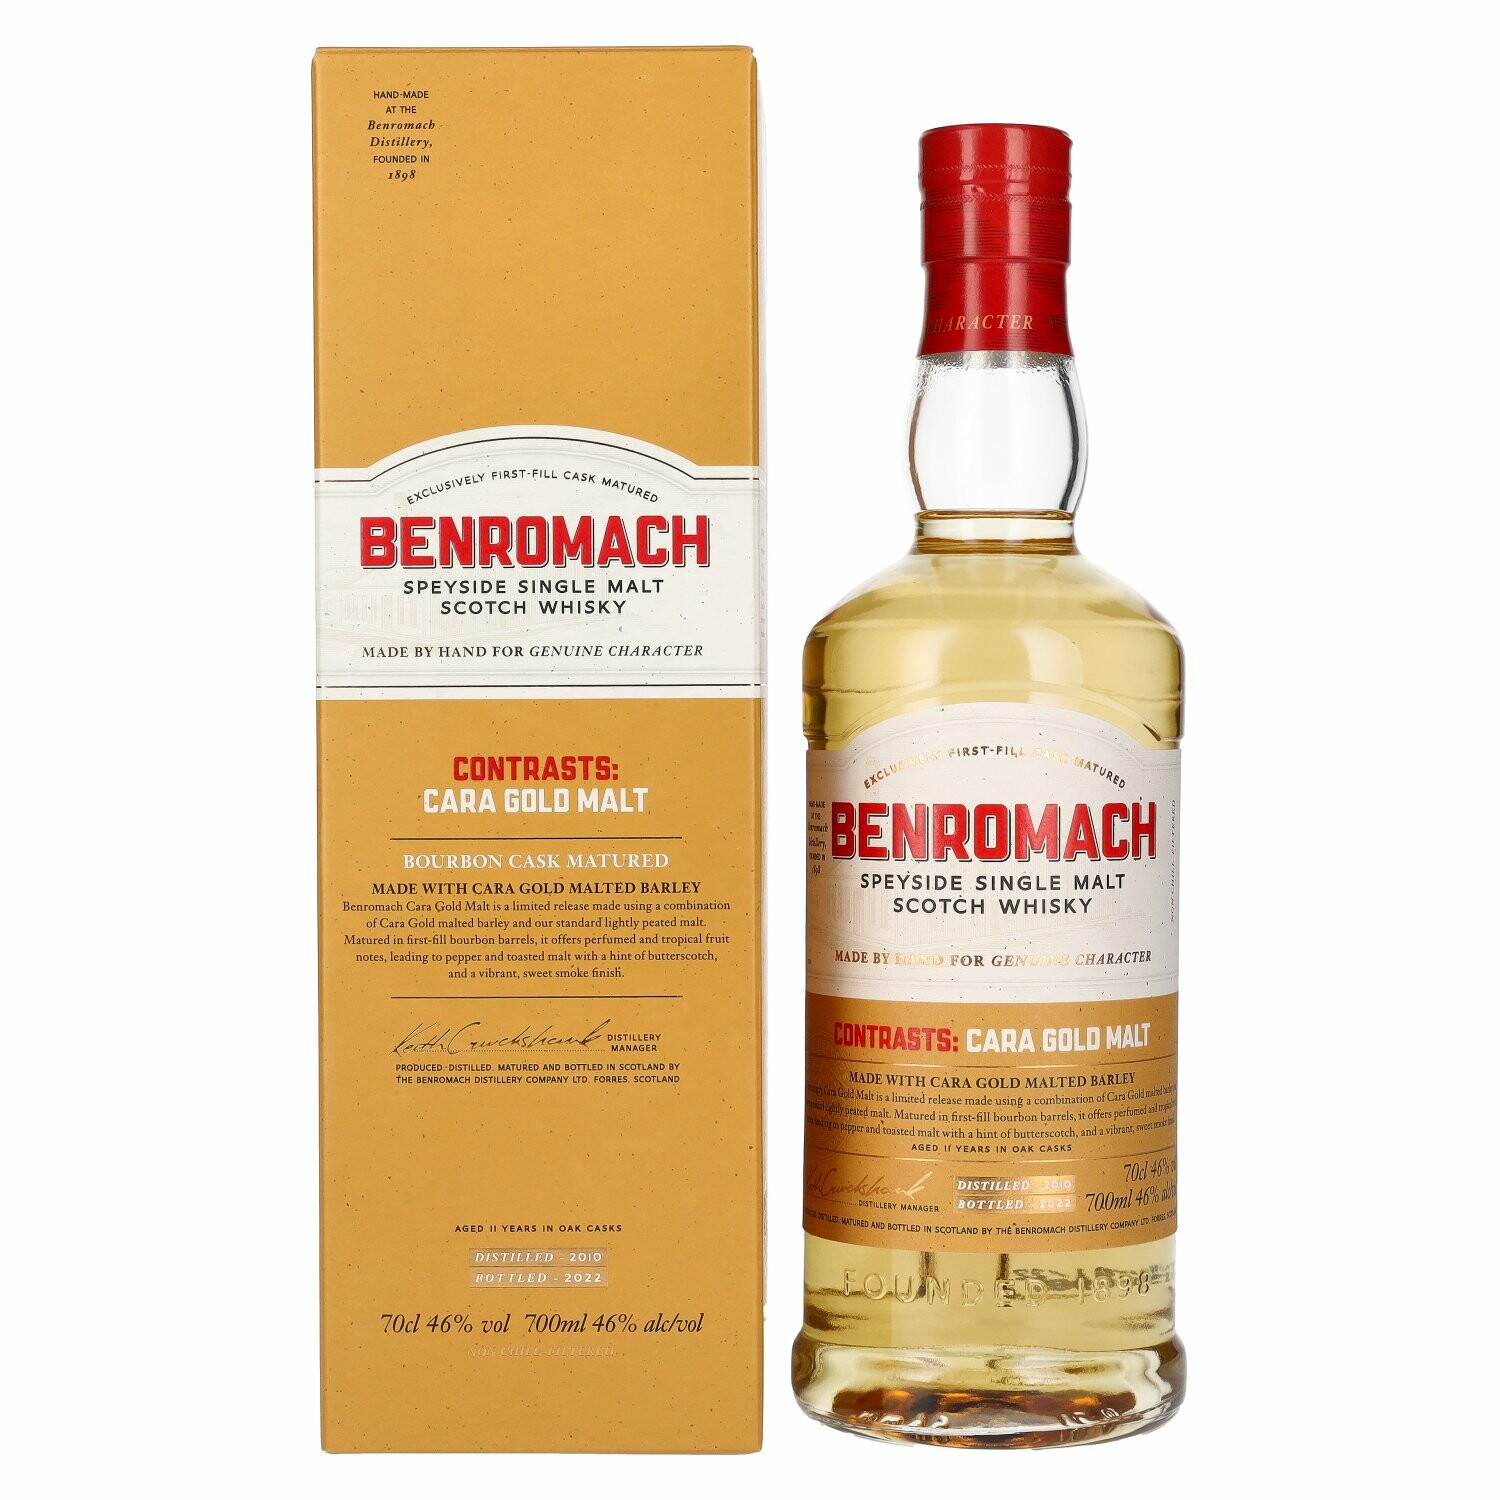 Benromach CONTRASTS: CARA GOLD MALT 11 Years Old 2010 46% Vol. 0,7l in Giftbox